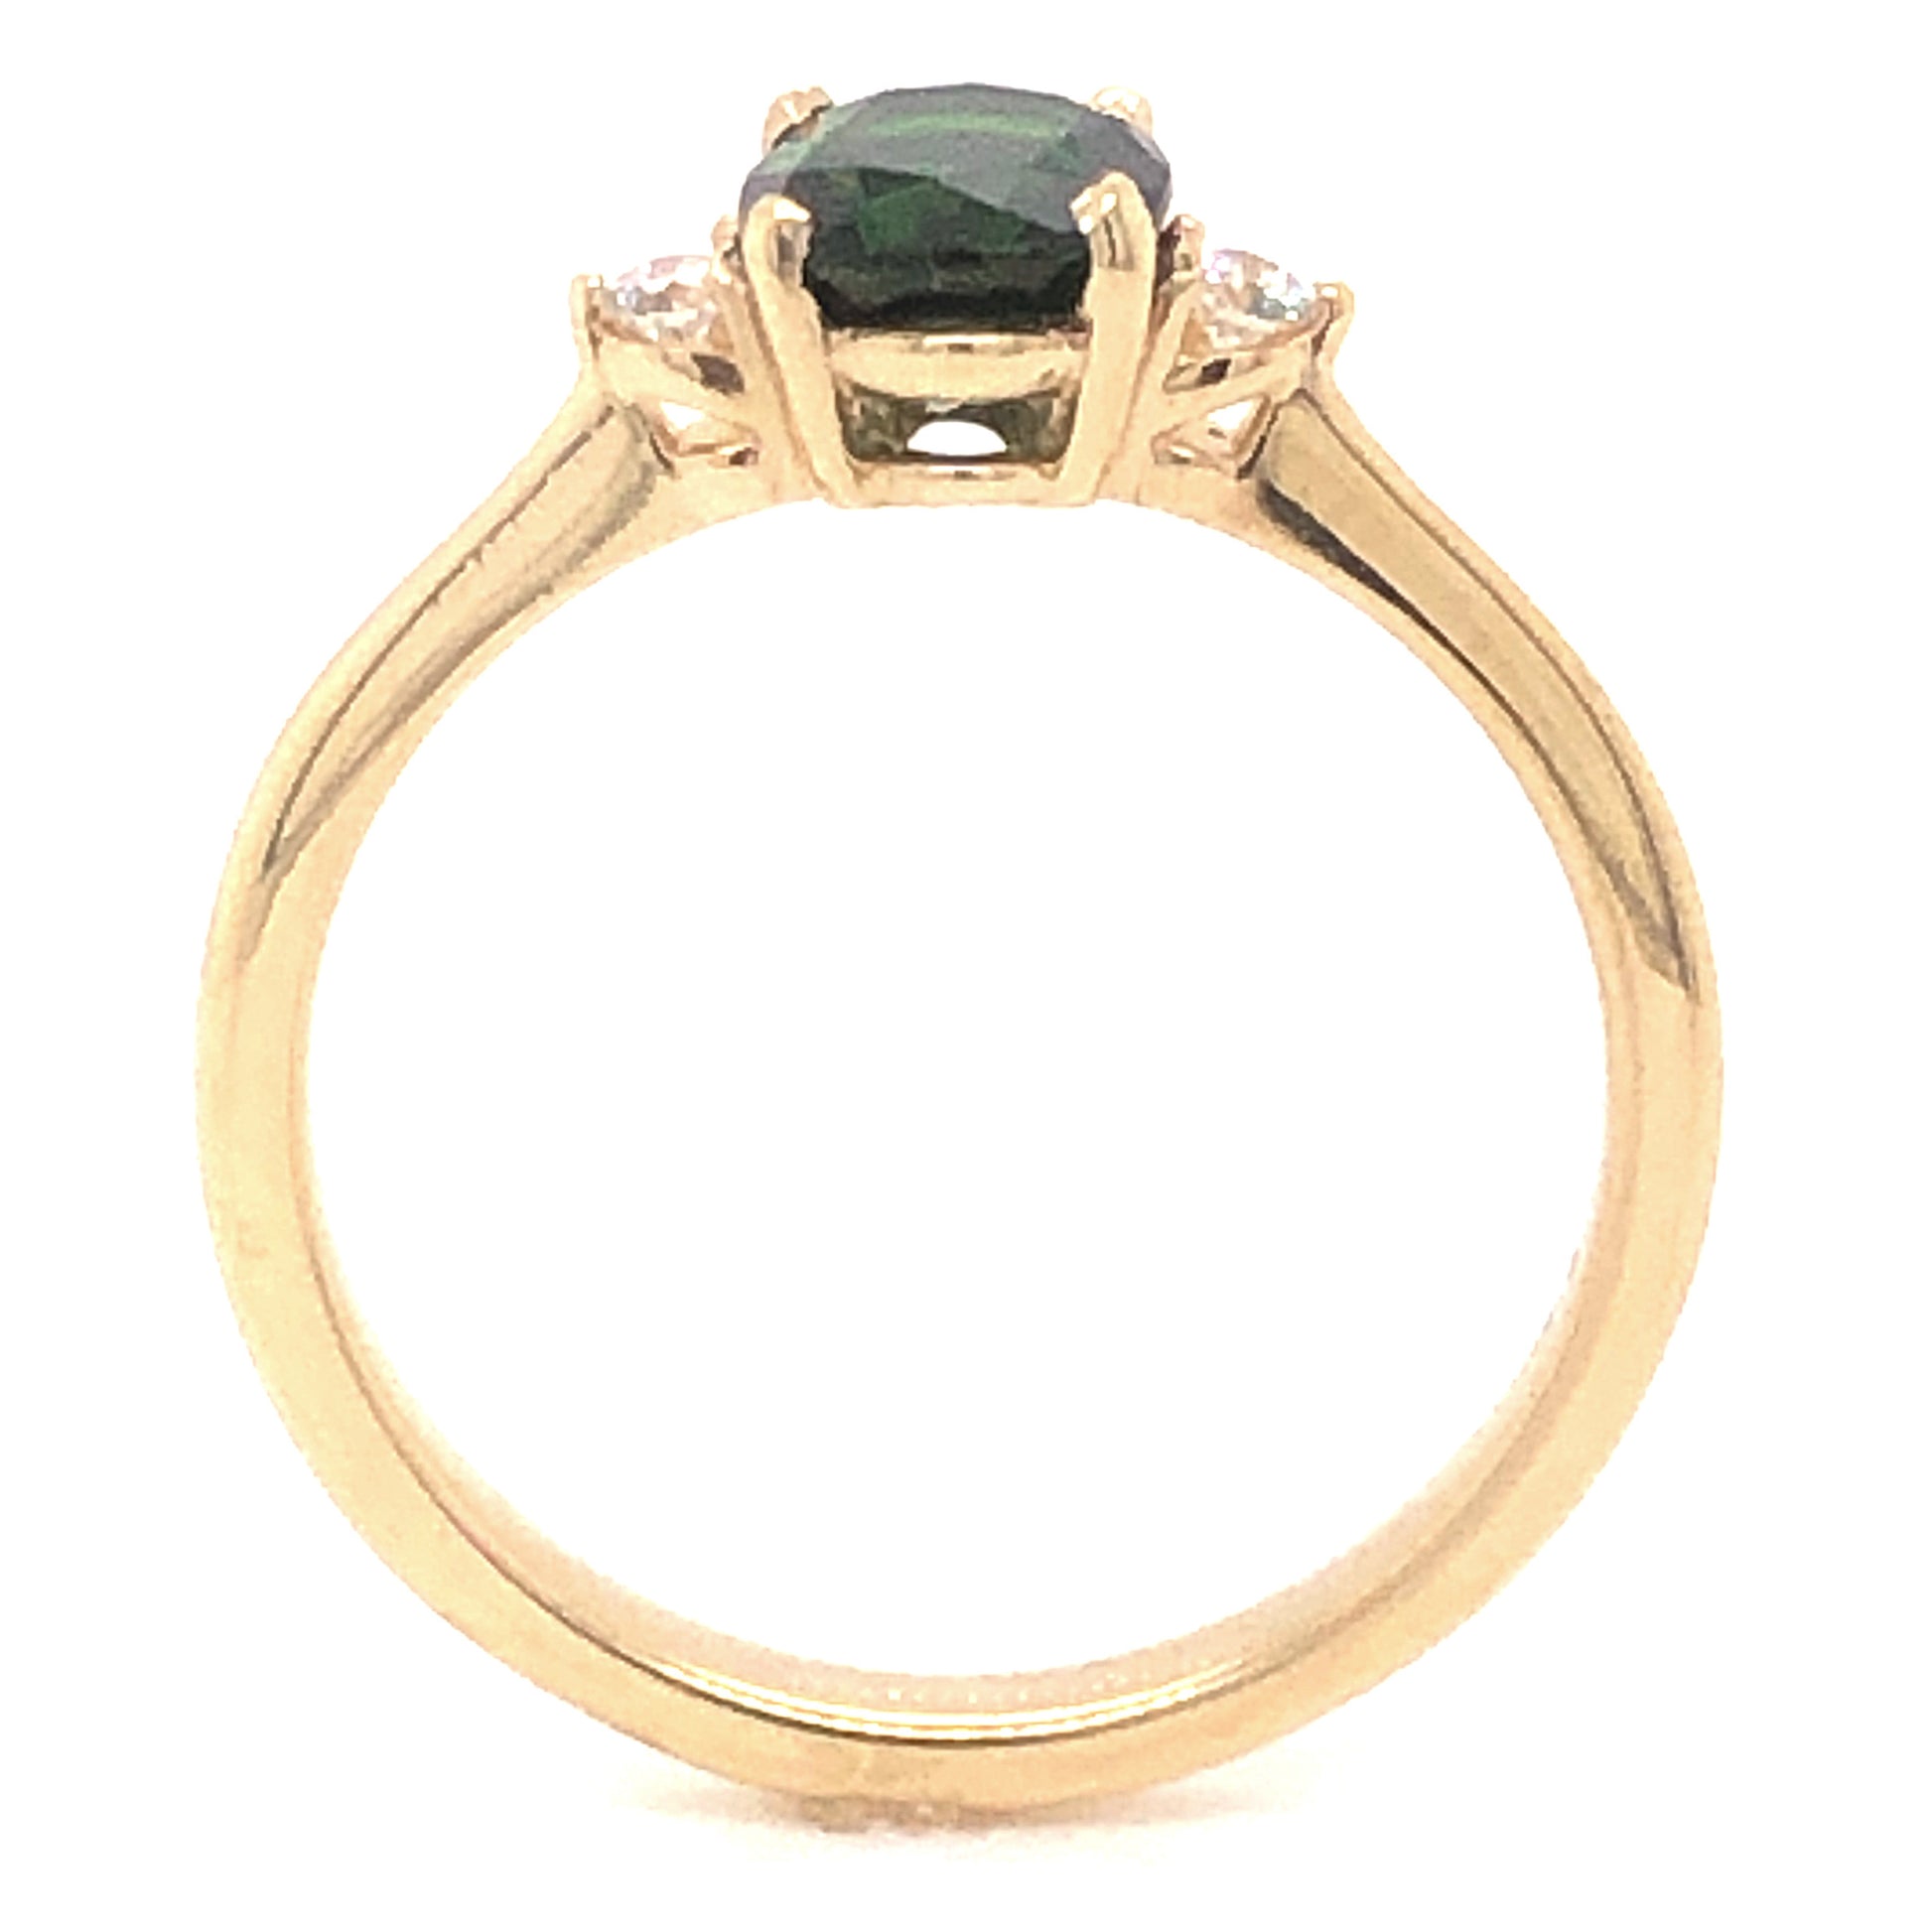 1.02 Oval Cut Tourmaline & Diamond Ring in 14k Yellow GoldComposition: PlatinumRing Size: 7Total Diamond Weight: .08 ctTotal Gram Weight: 2.5 gInscription: 14k